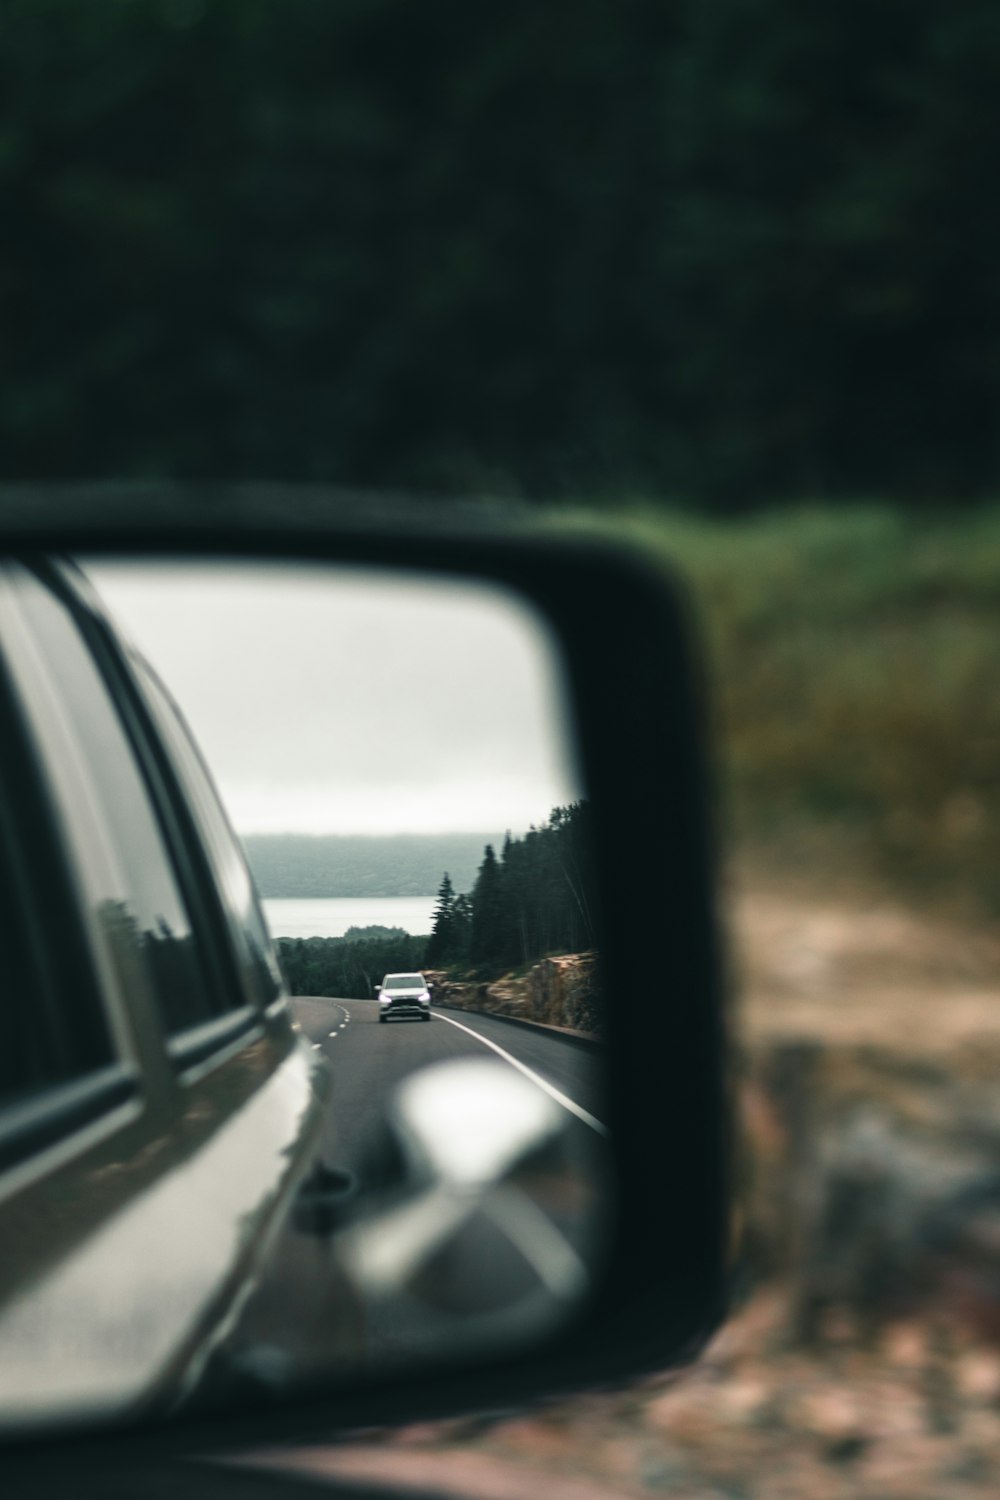 a car's side view mirror reflecting a car's view of a road